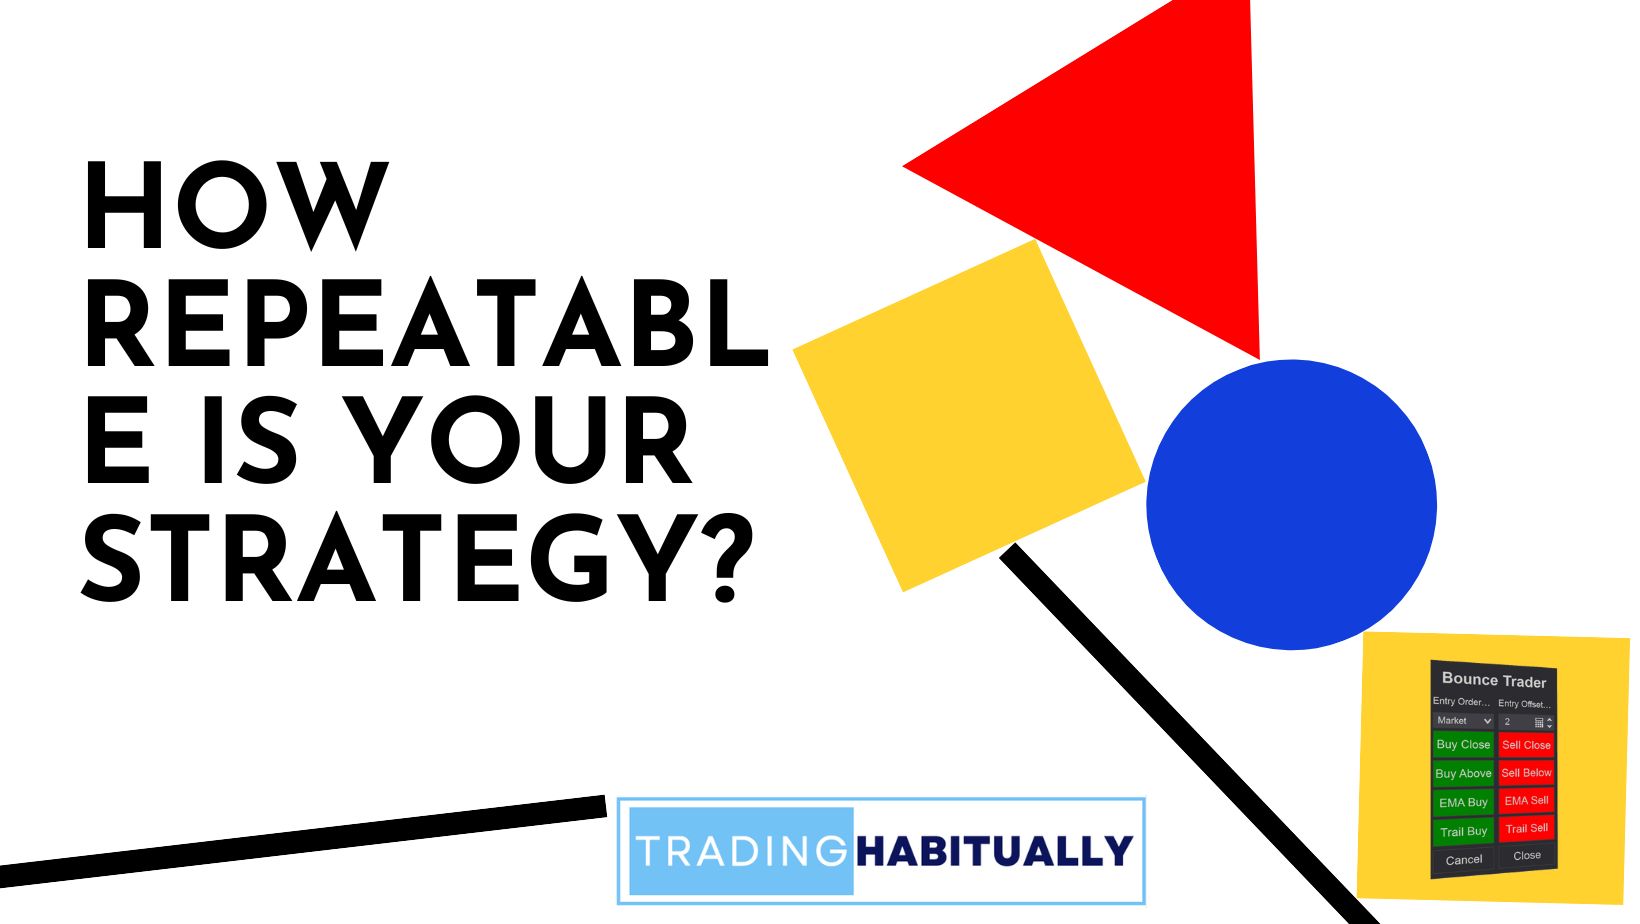 how repeatable is your strategy?